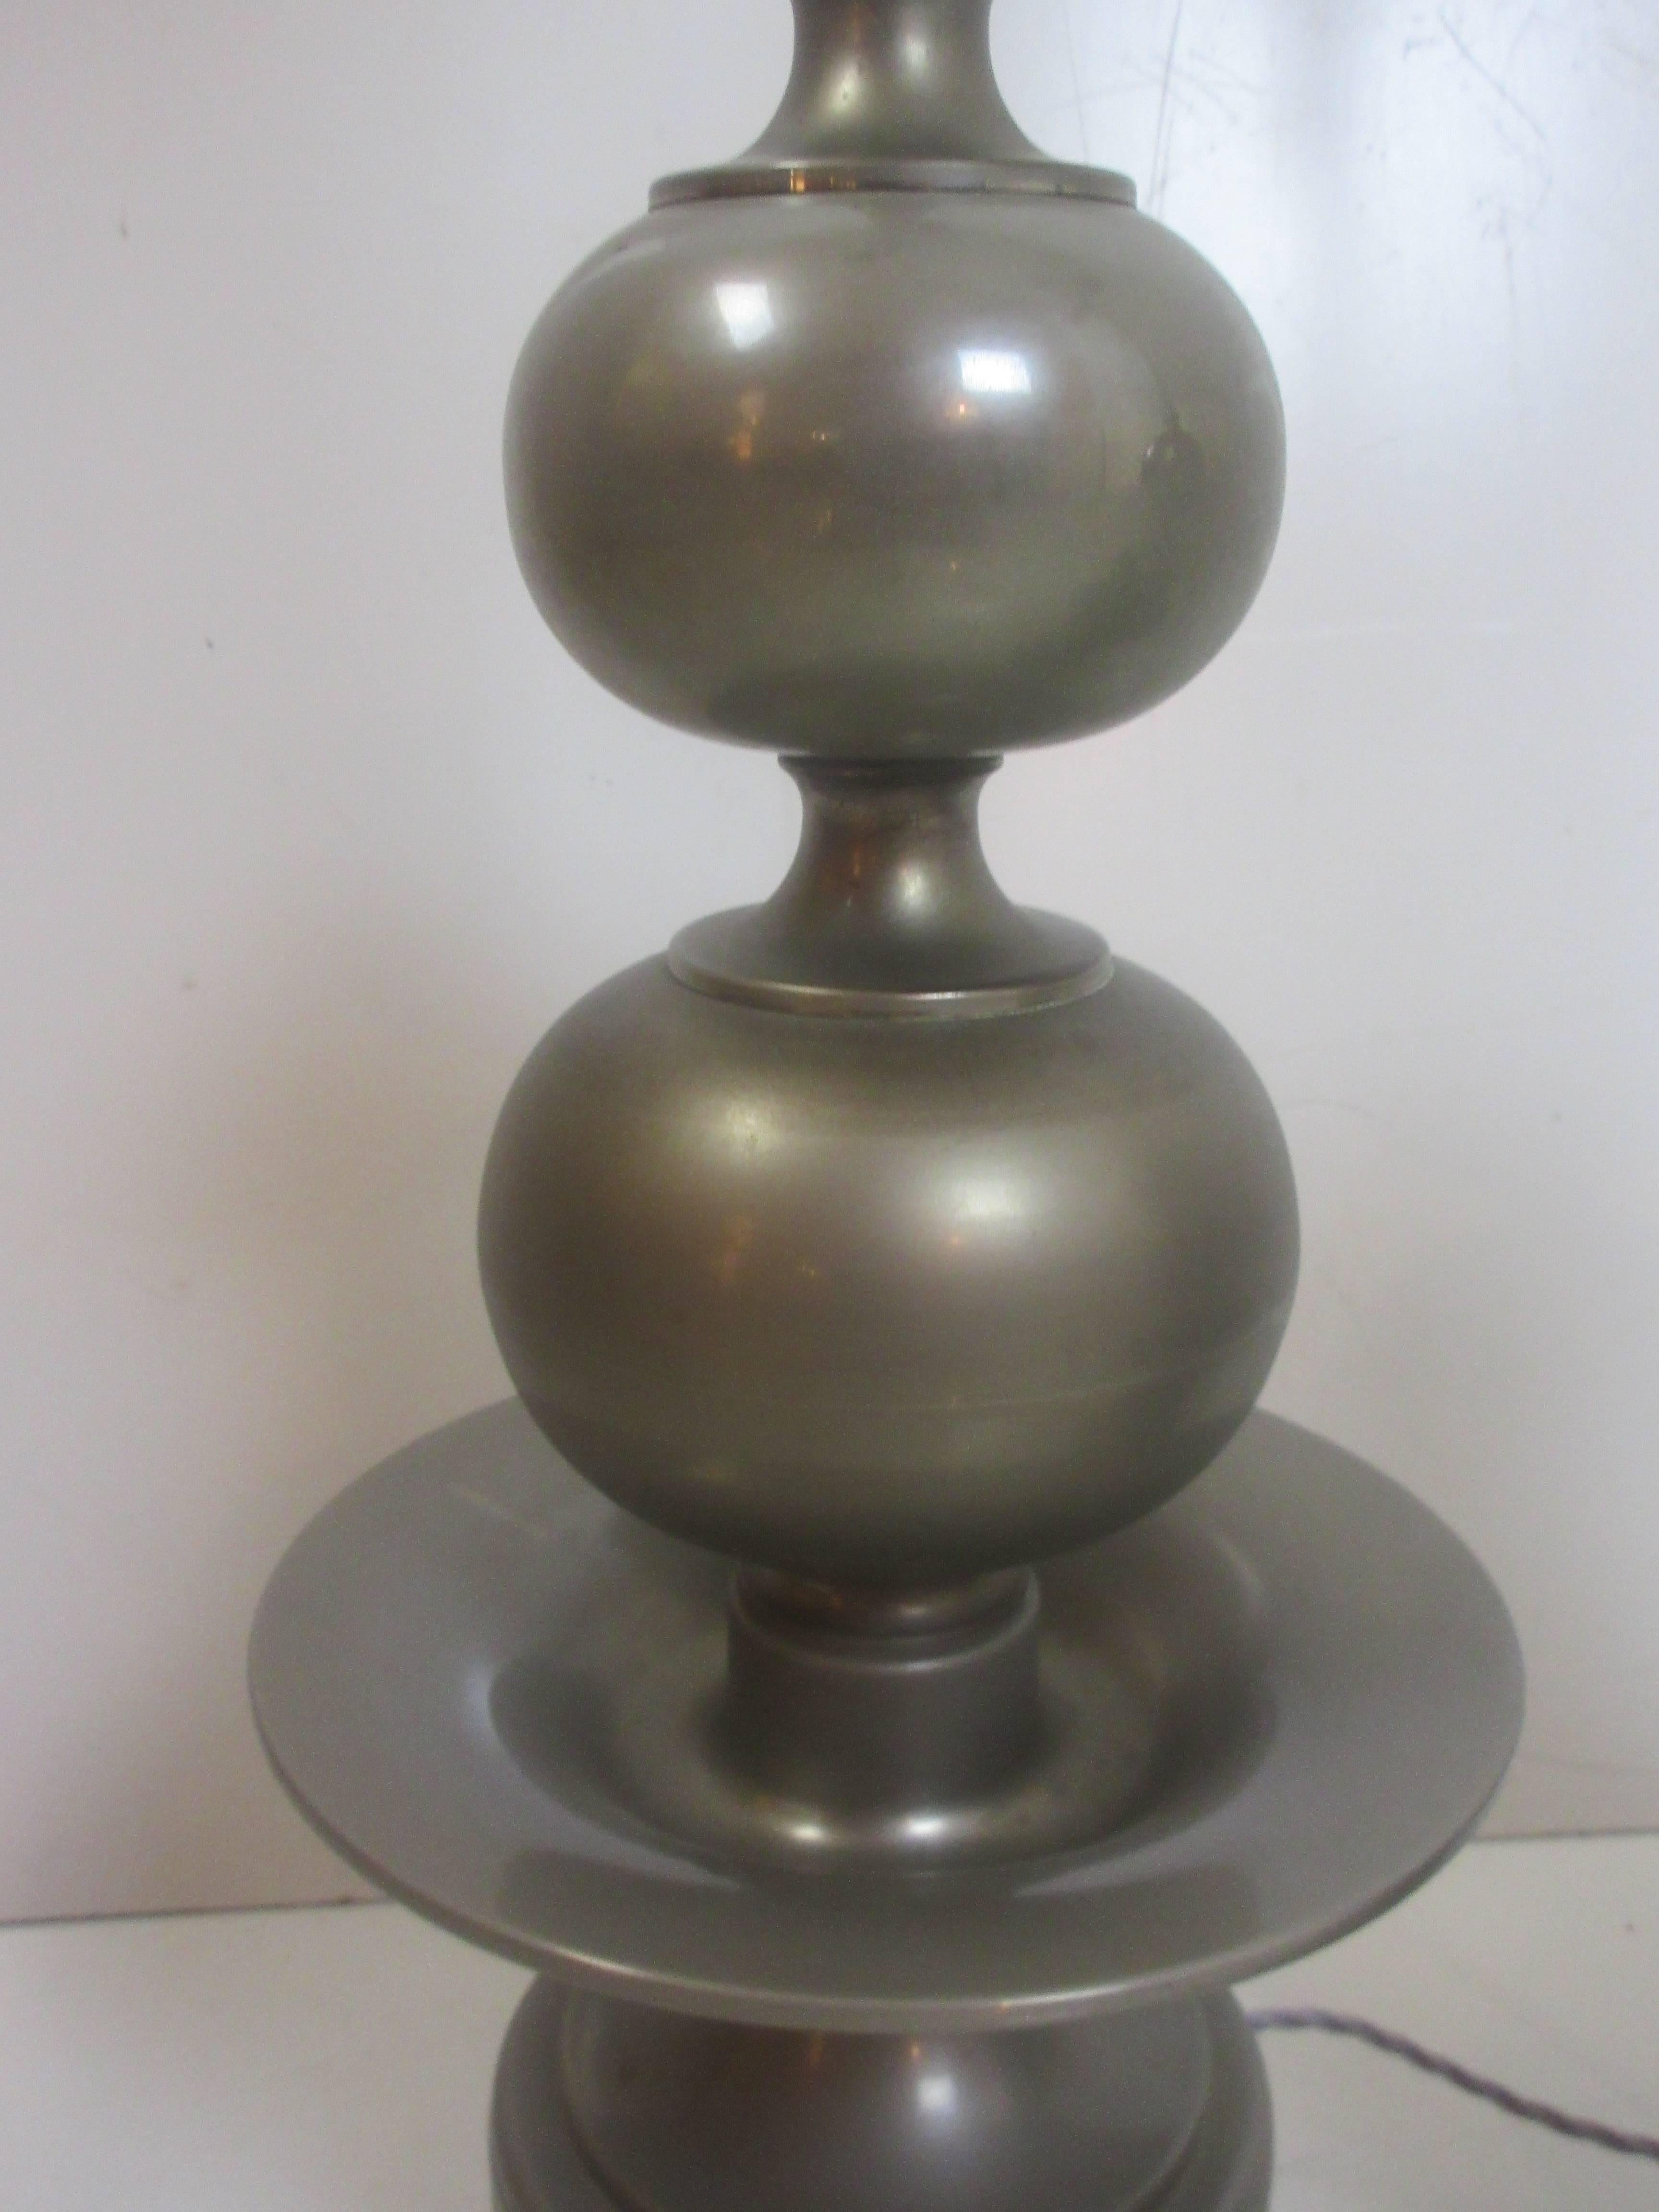 Made in Italy, pair of tall table lamps with a Moorish influence. Pewter gives a softness to the overall appearance of the lamps. Lamps have Directional light shining up from the metal shades and two Directional light sockets pointing down. New Silk